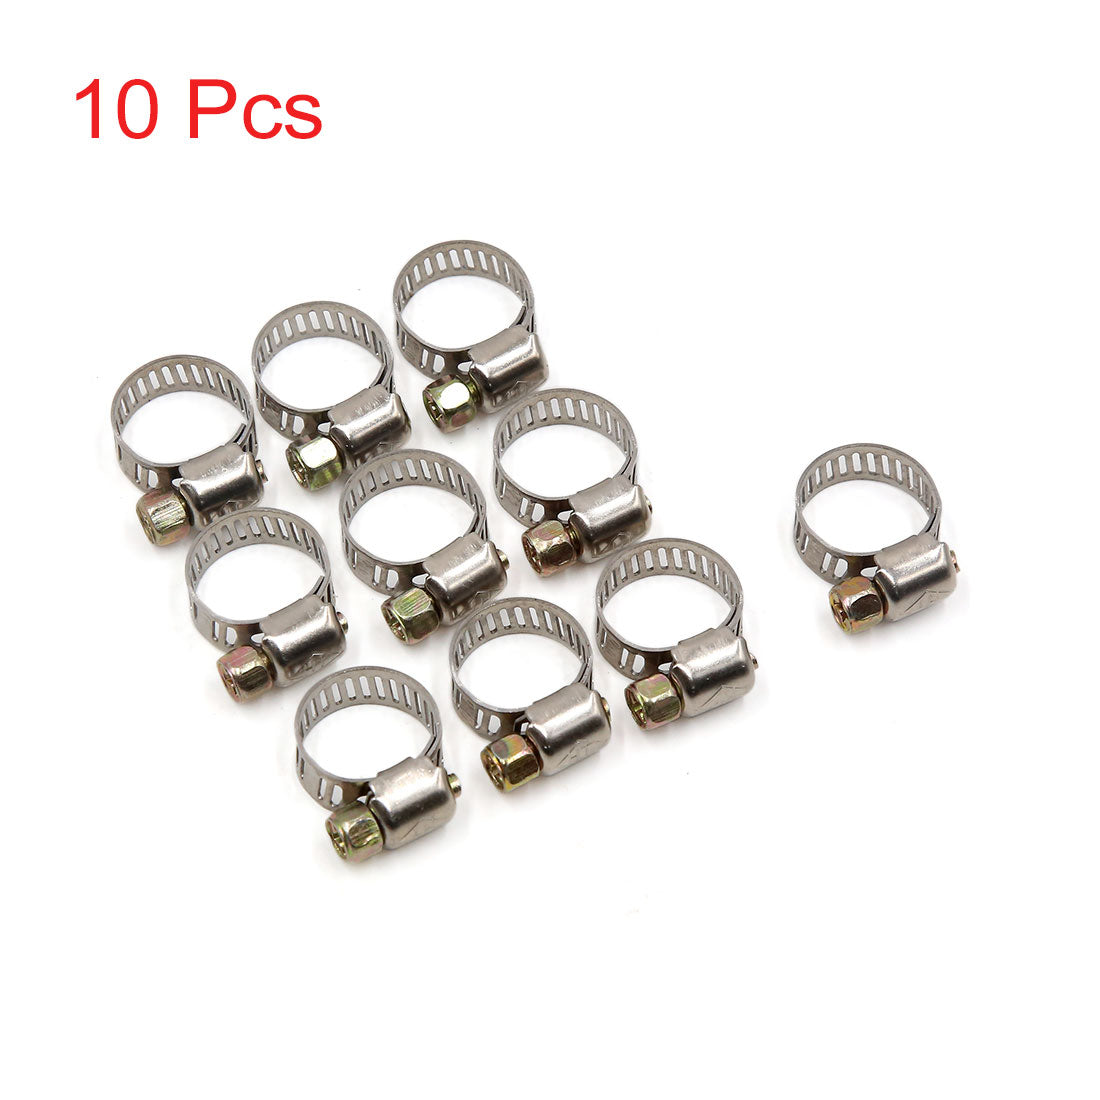 uxcell Uxcell 10 Pcs Stainless Steel Adjustable Hose Clamps Fuel Line  Clips 9-16mm for Car Auto